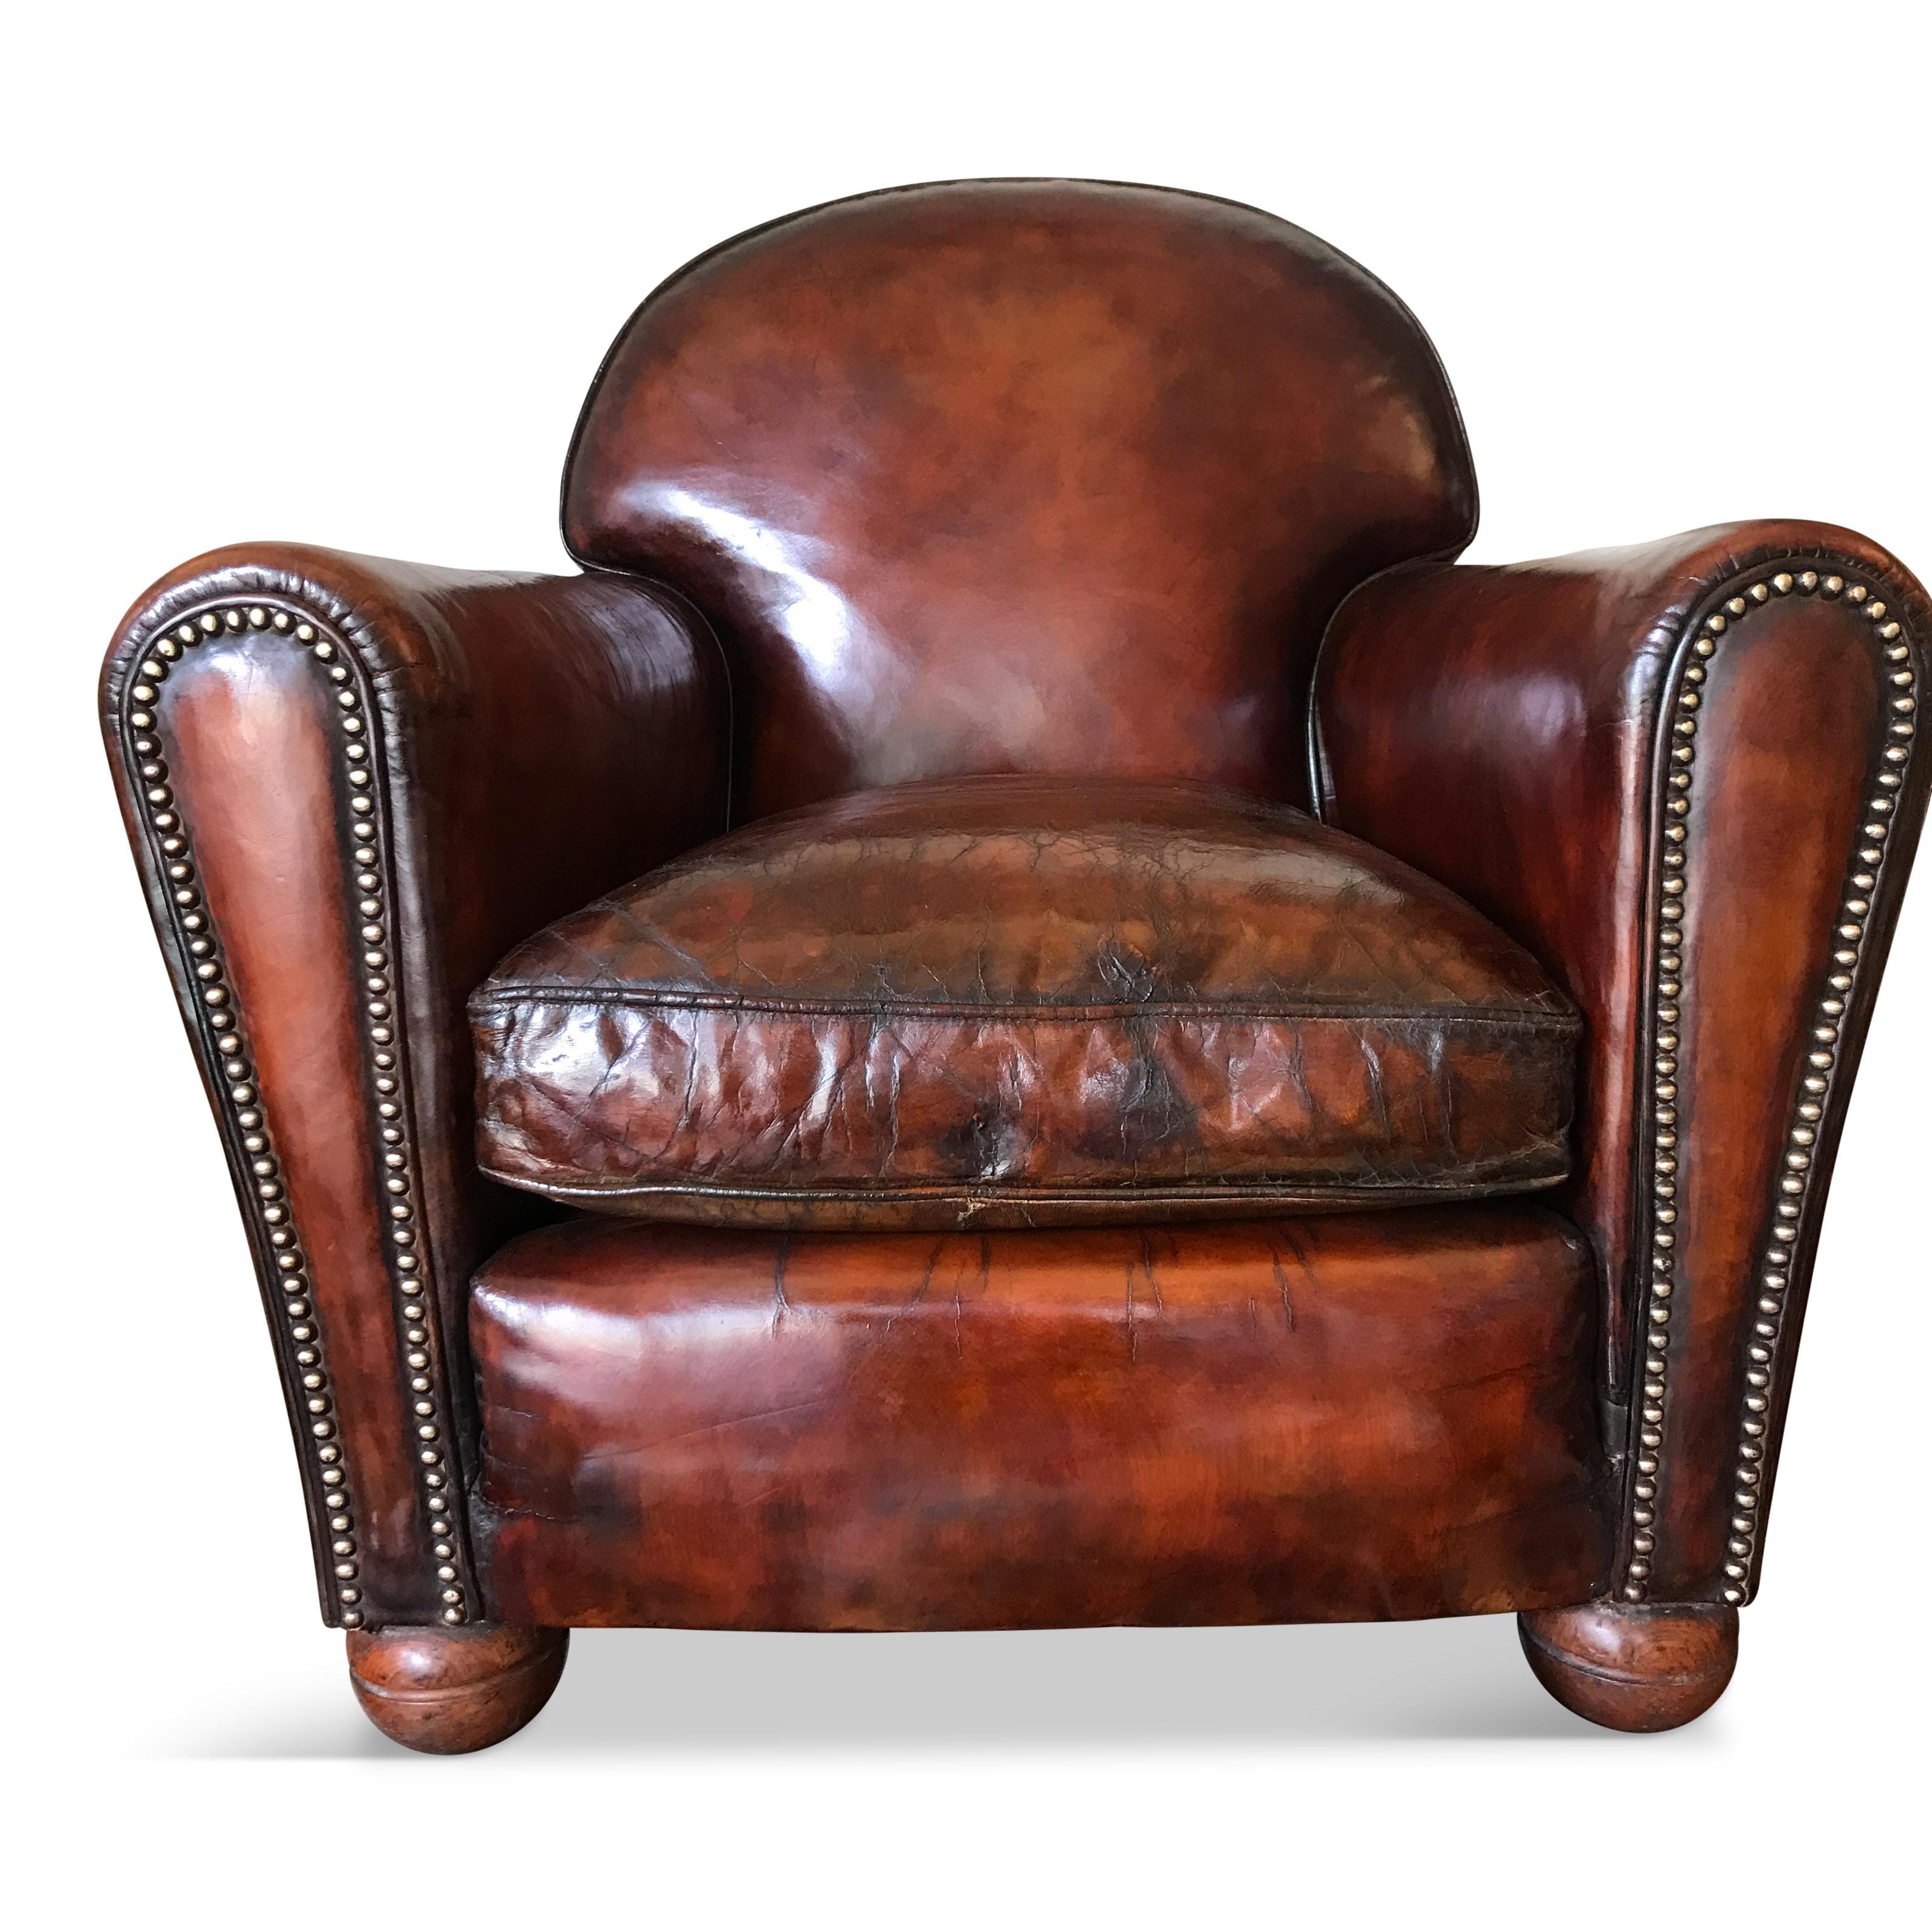 1940s compact conquer brown leather armchair from Belgium.

Incredibly stylish and a great addition to the room.